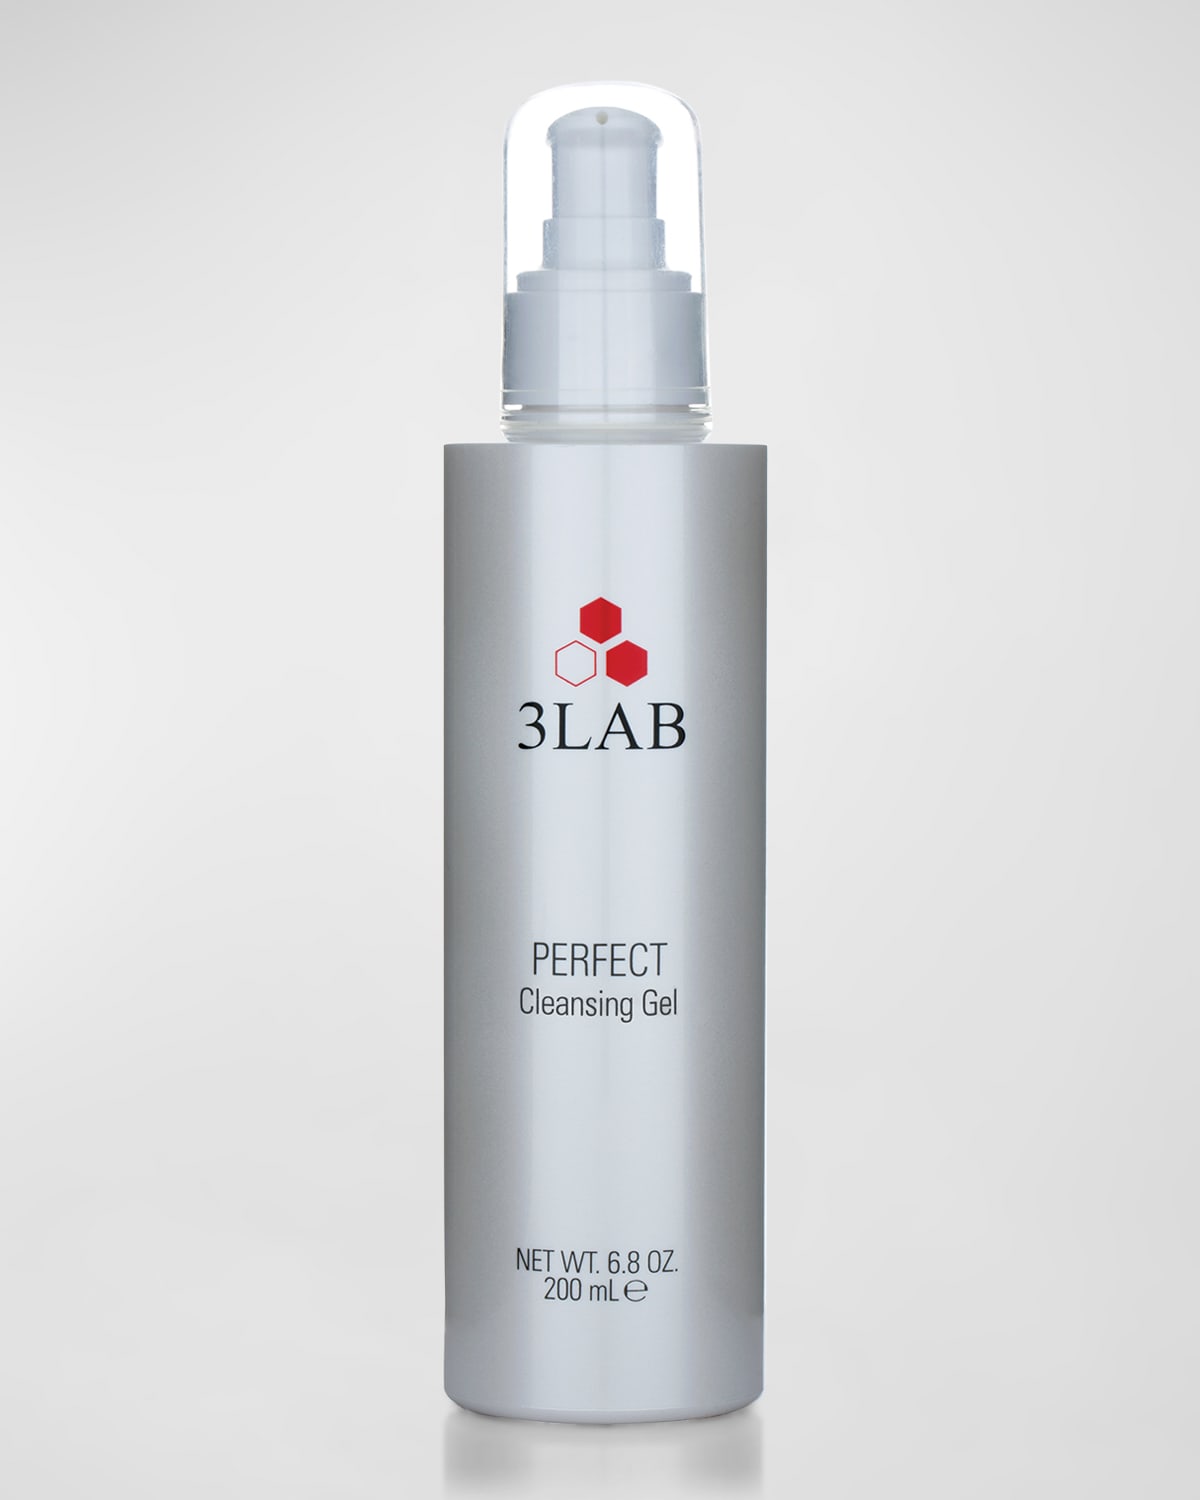 Perfect Cleansing Oil, 6.8 oz. - Yours with any $300 3LAB Purchase